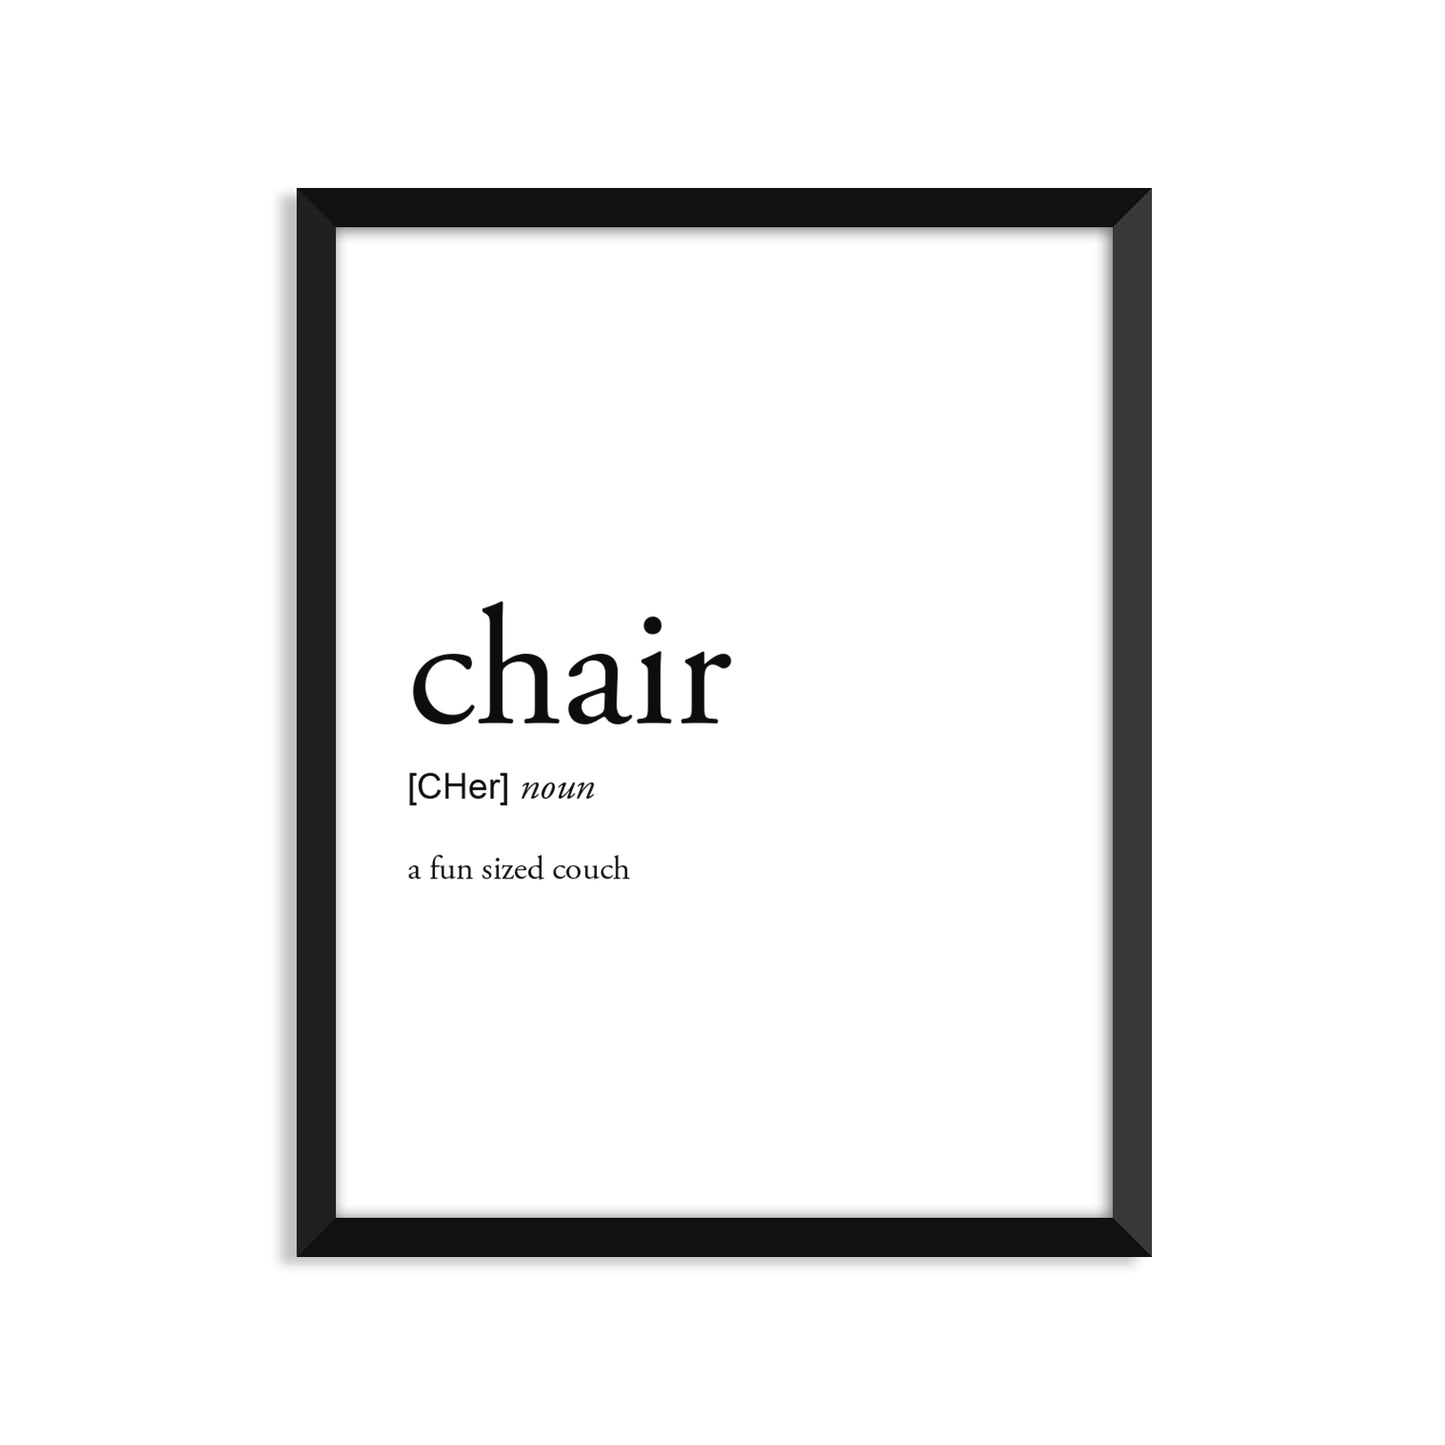 Chair Definition - Unframed Art Print Or Greeting Card